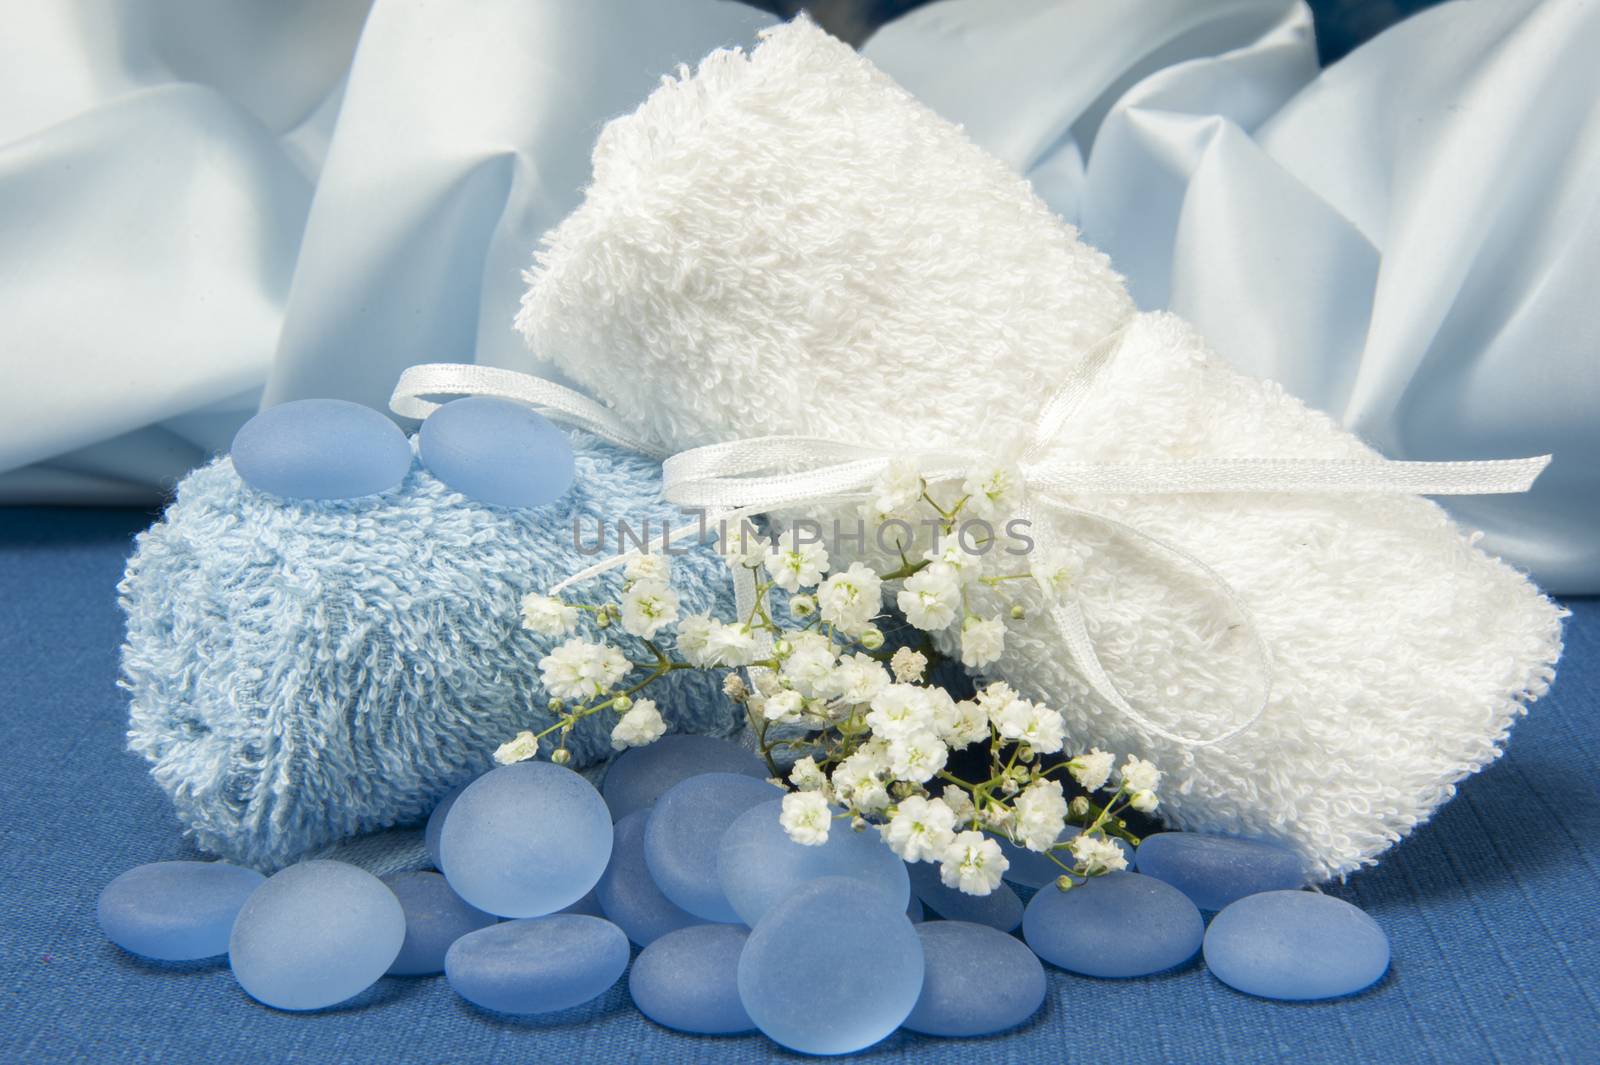 Towels and blue stones by carla720